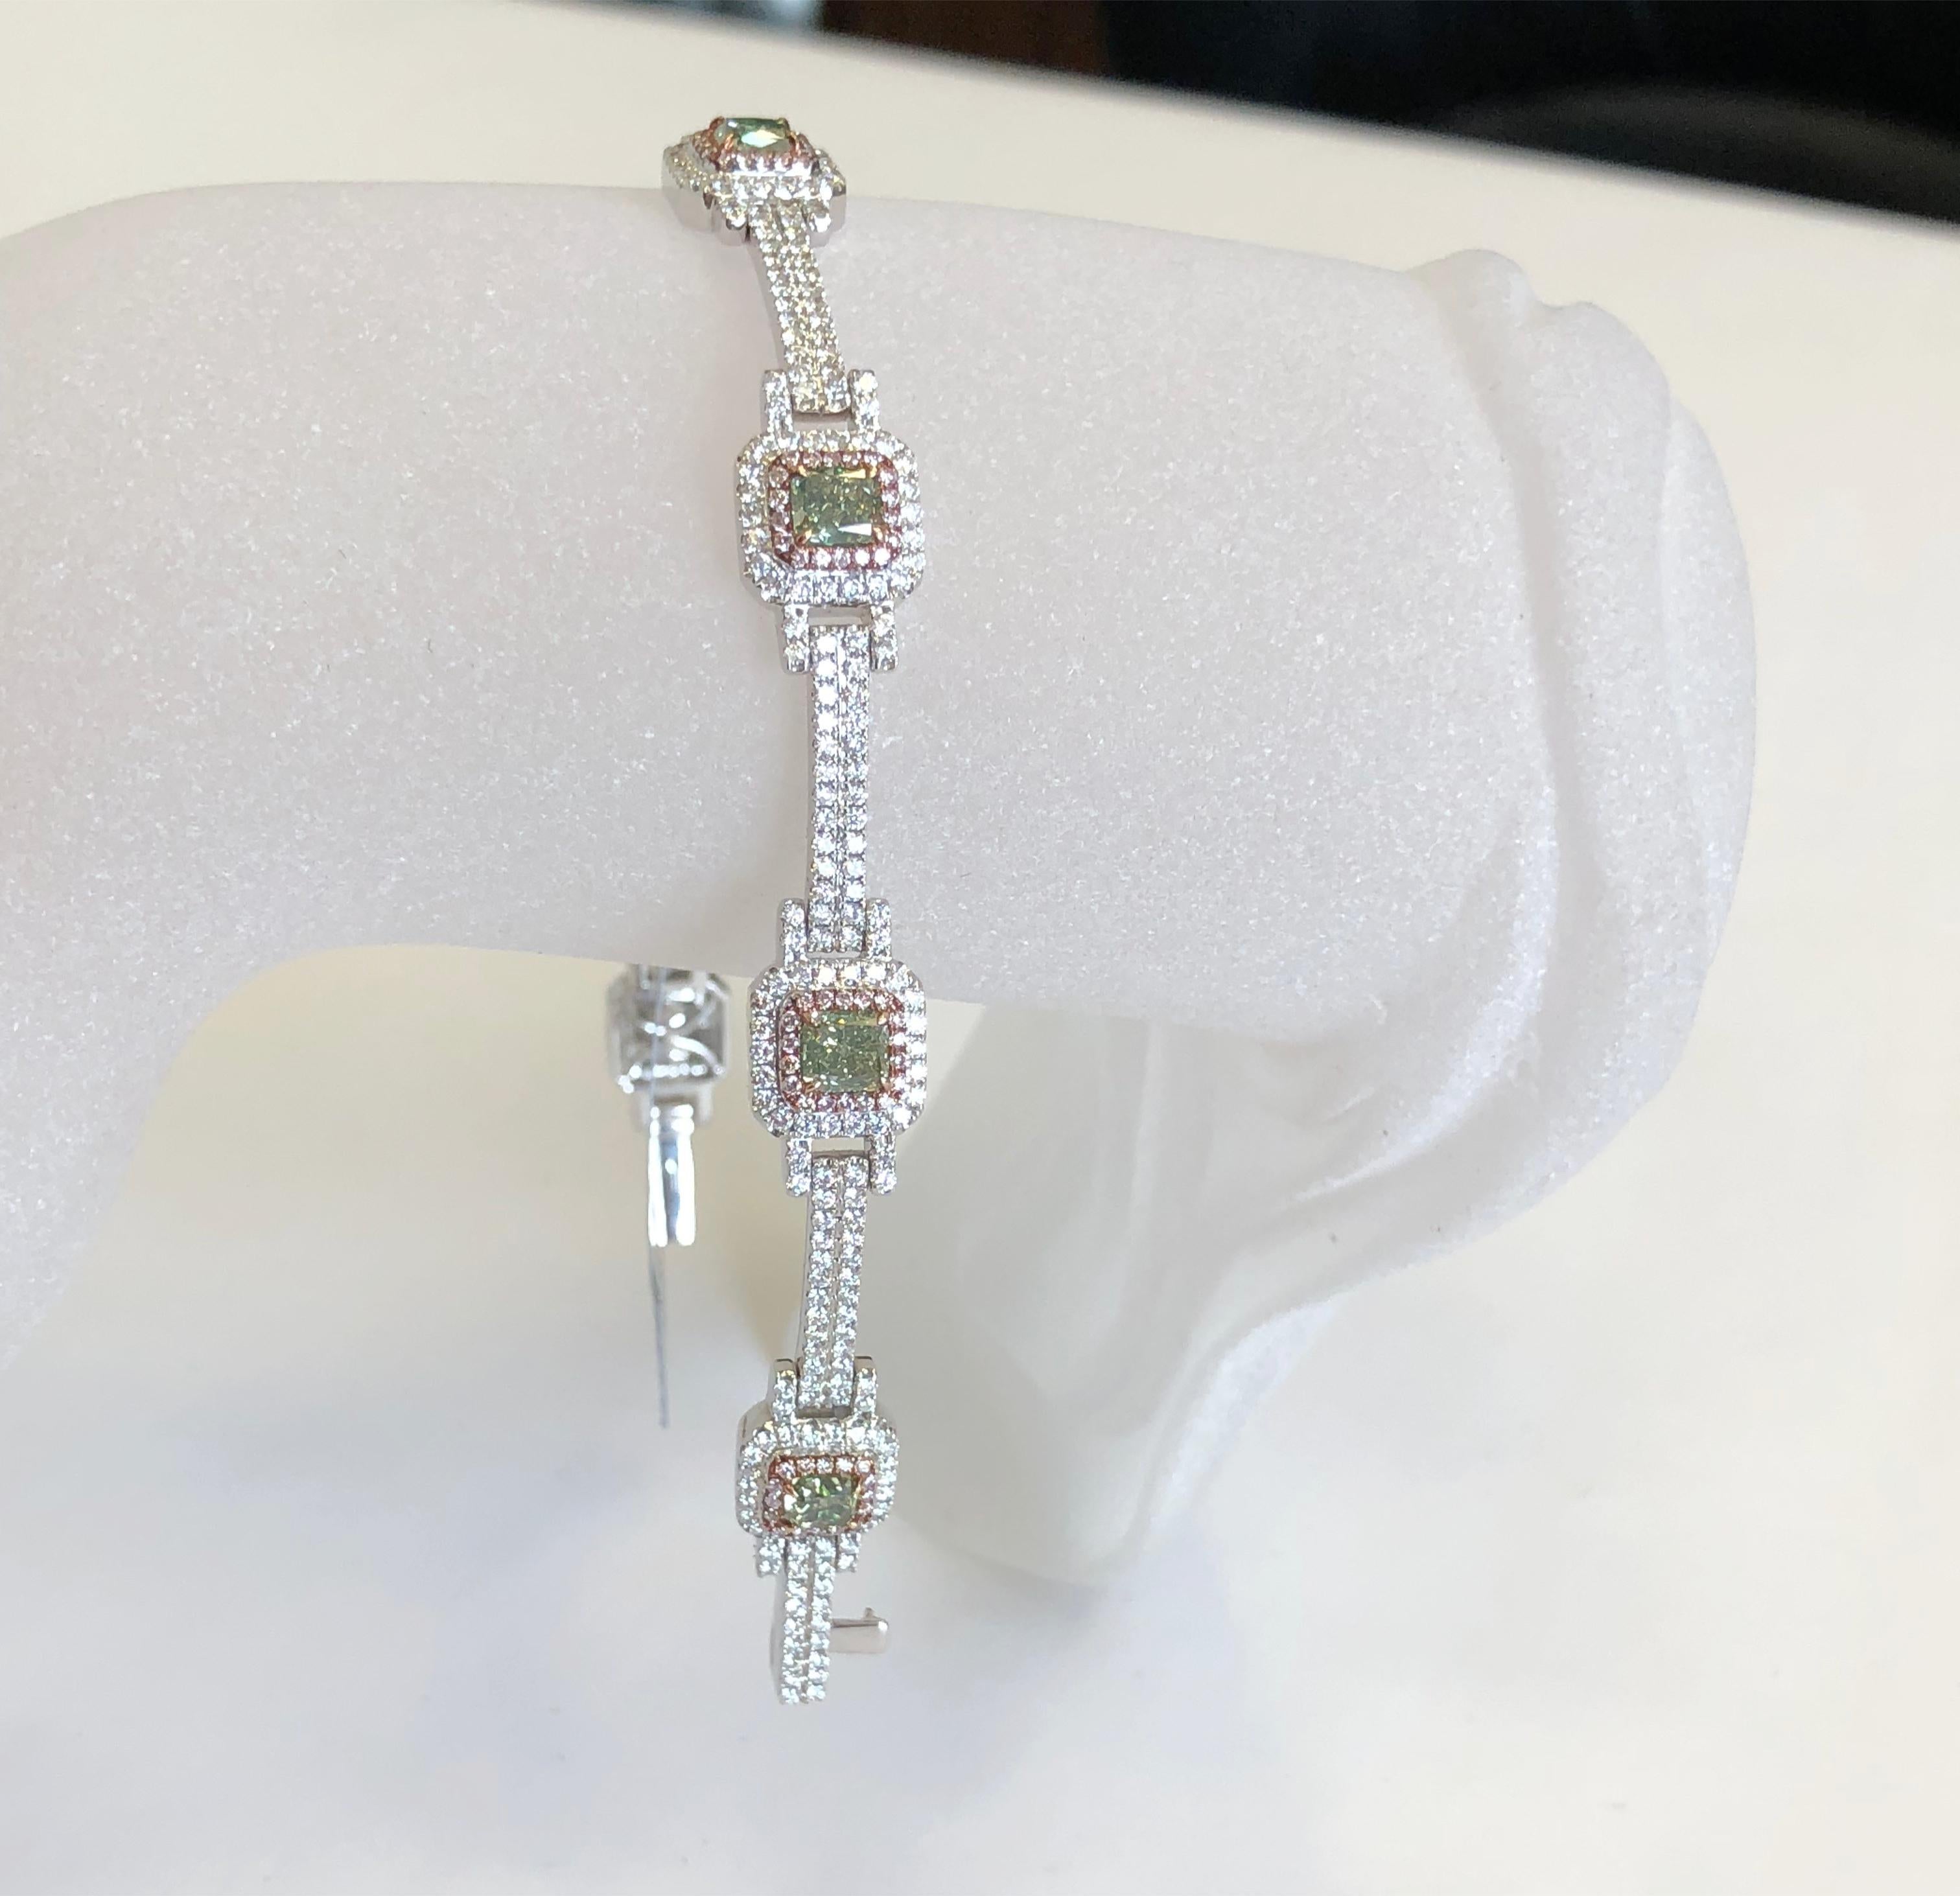 Stunning bracelet with 3.82 carats of green diamonds and 3.10 carats of white and pink diamonds in 18k white gold.  Flexible and dainty handmade mounting.  Perfect for everyday stacking with other bracelets and watch or for a special occasion.  